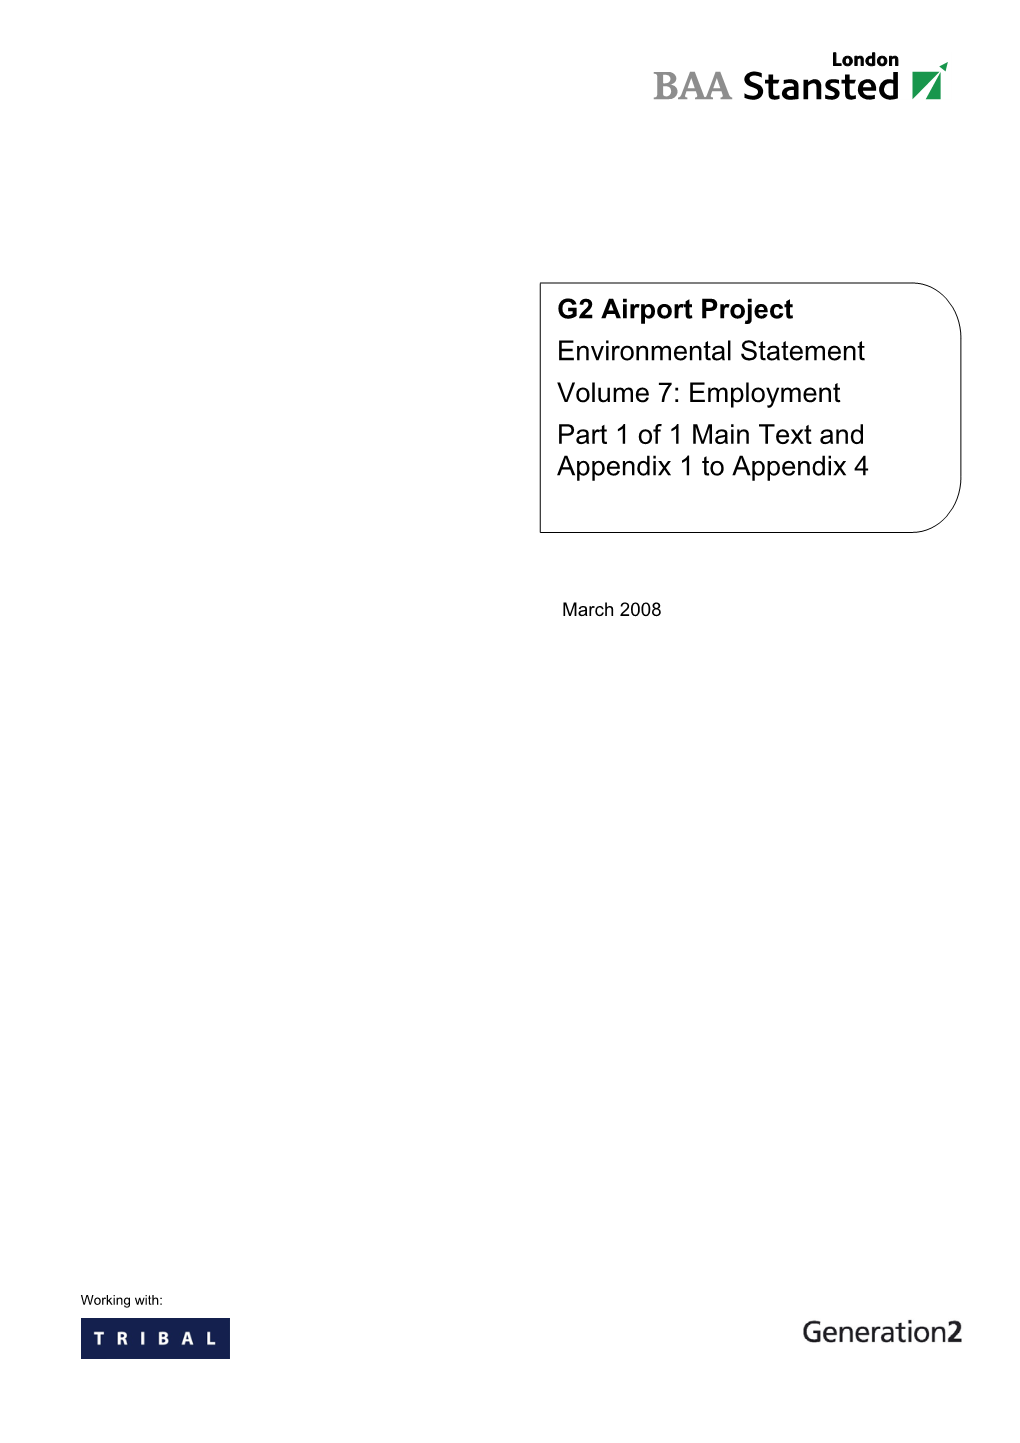 G2 Airport Project Environmental Statement Volume 7: Employment Part 1 of 1 Main Text and Appendix 1 to Appendix 4